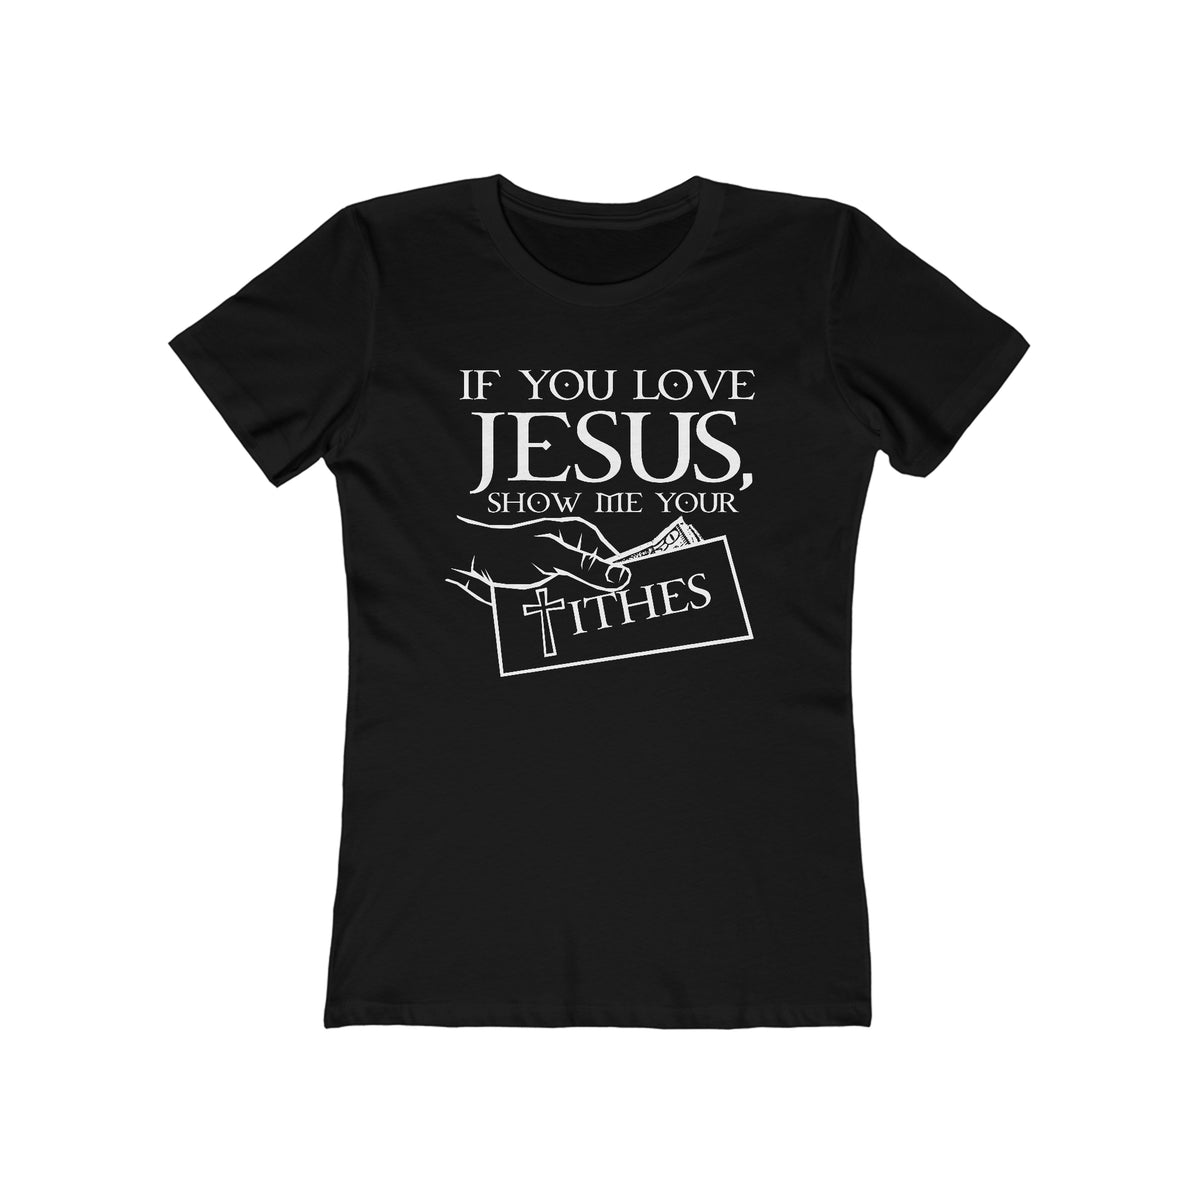 If You Love Jesus Show Me Your Tithes - Women’s T-Shirt